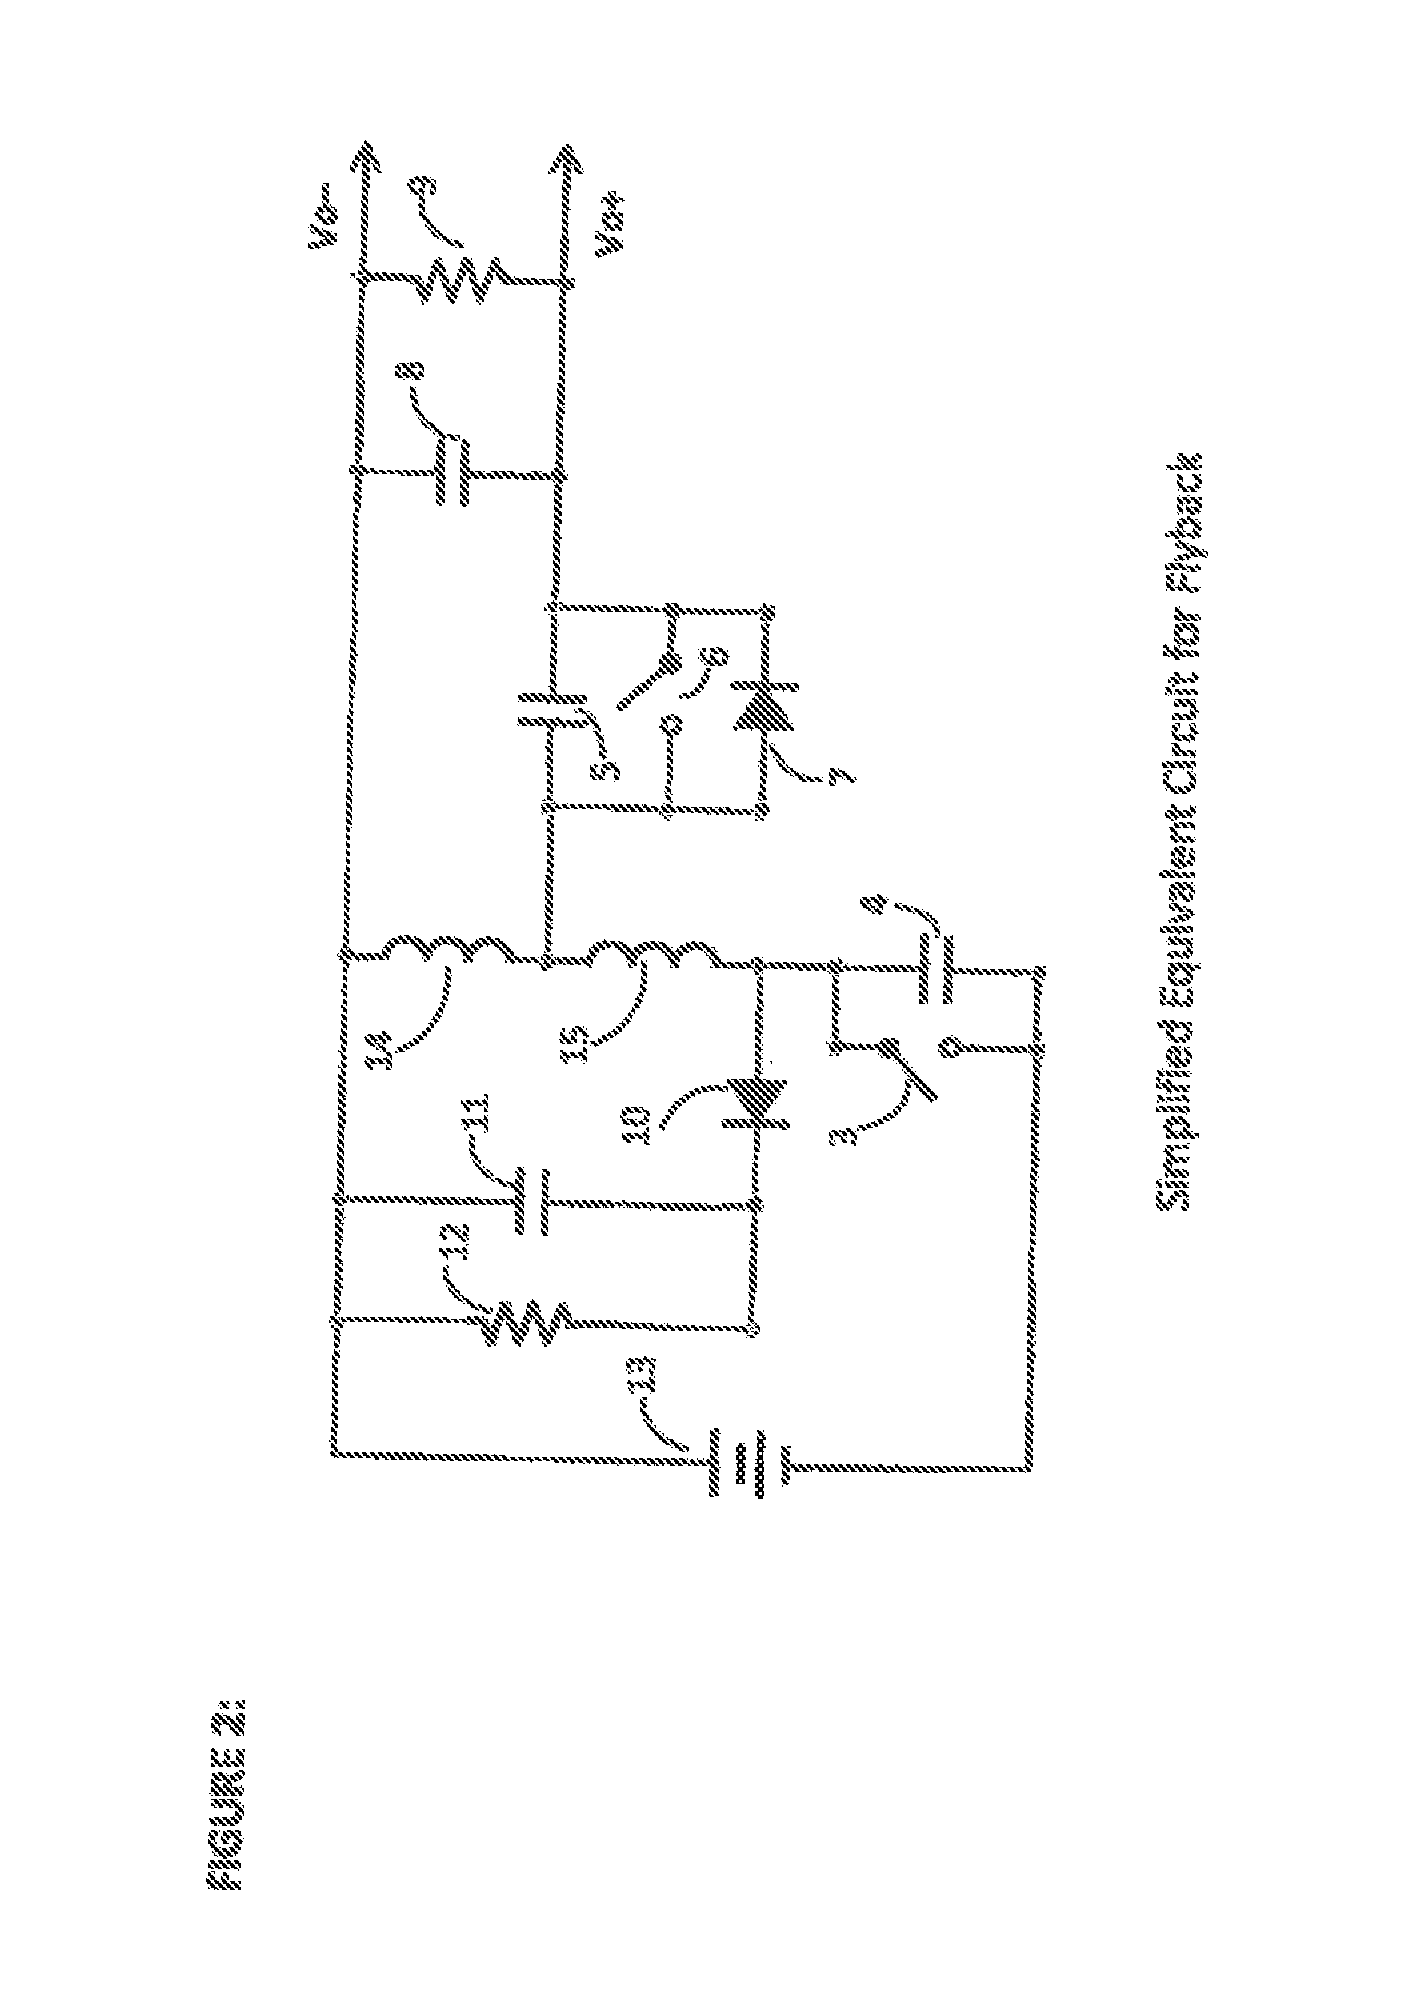 Partial Time Active Clamp Flyback